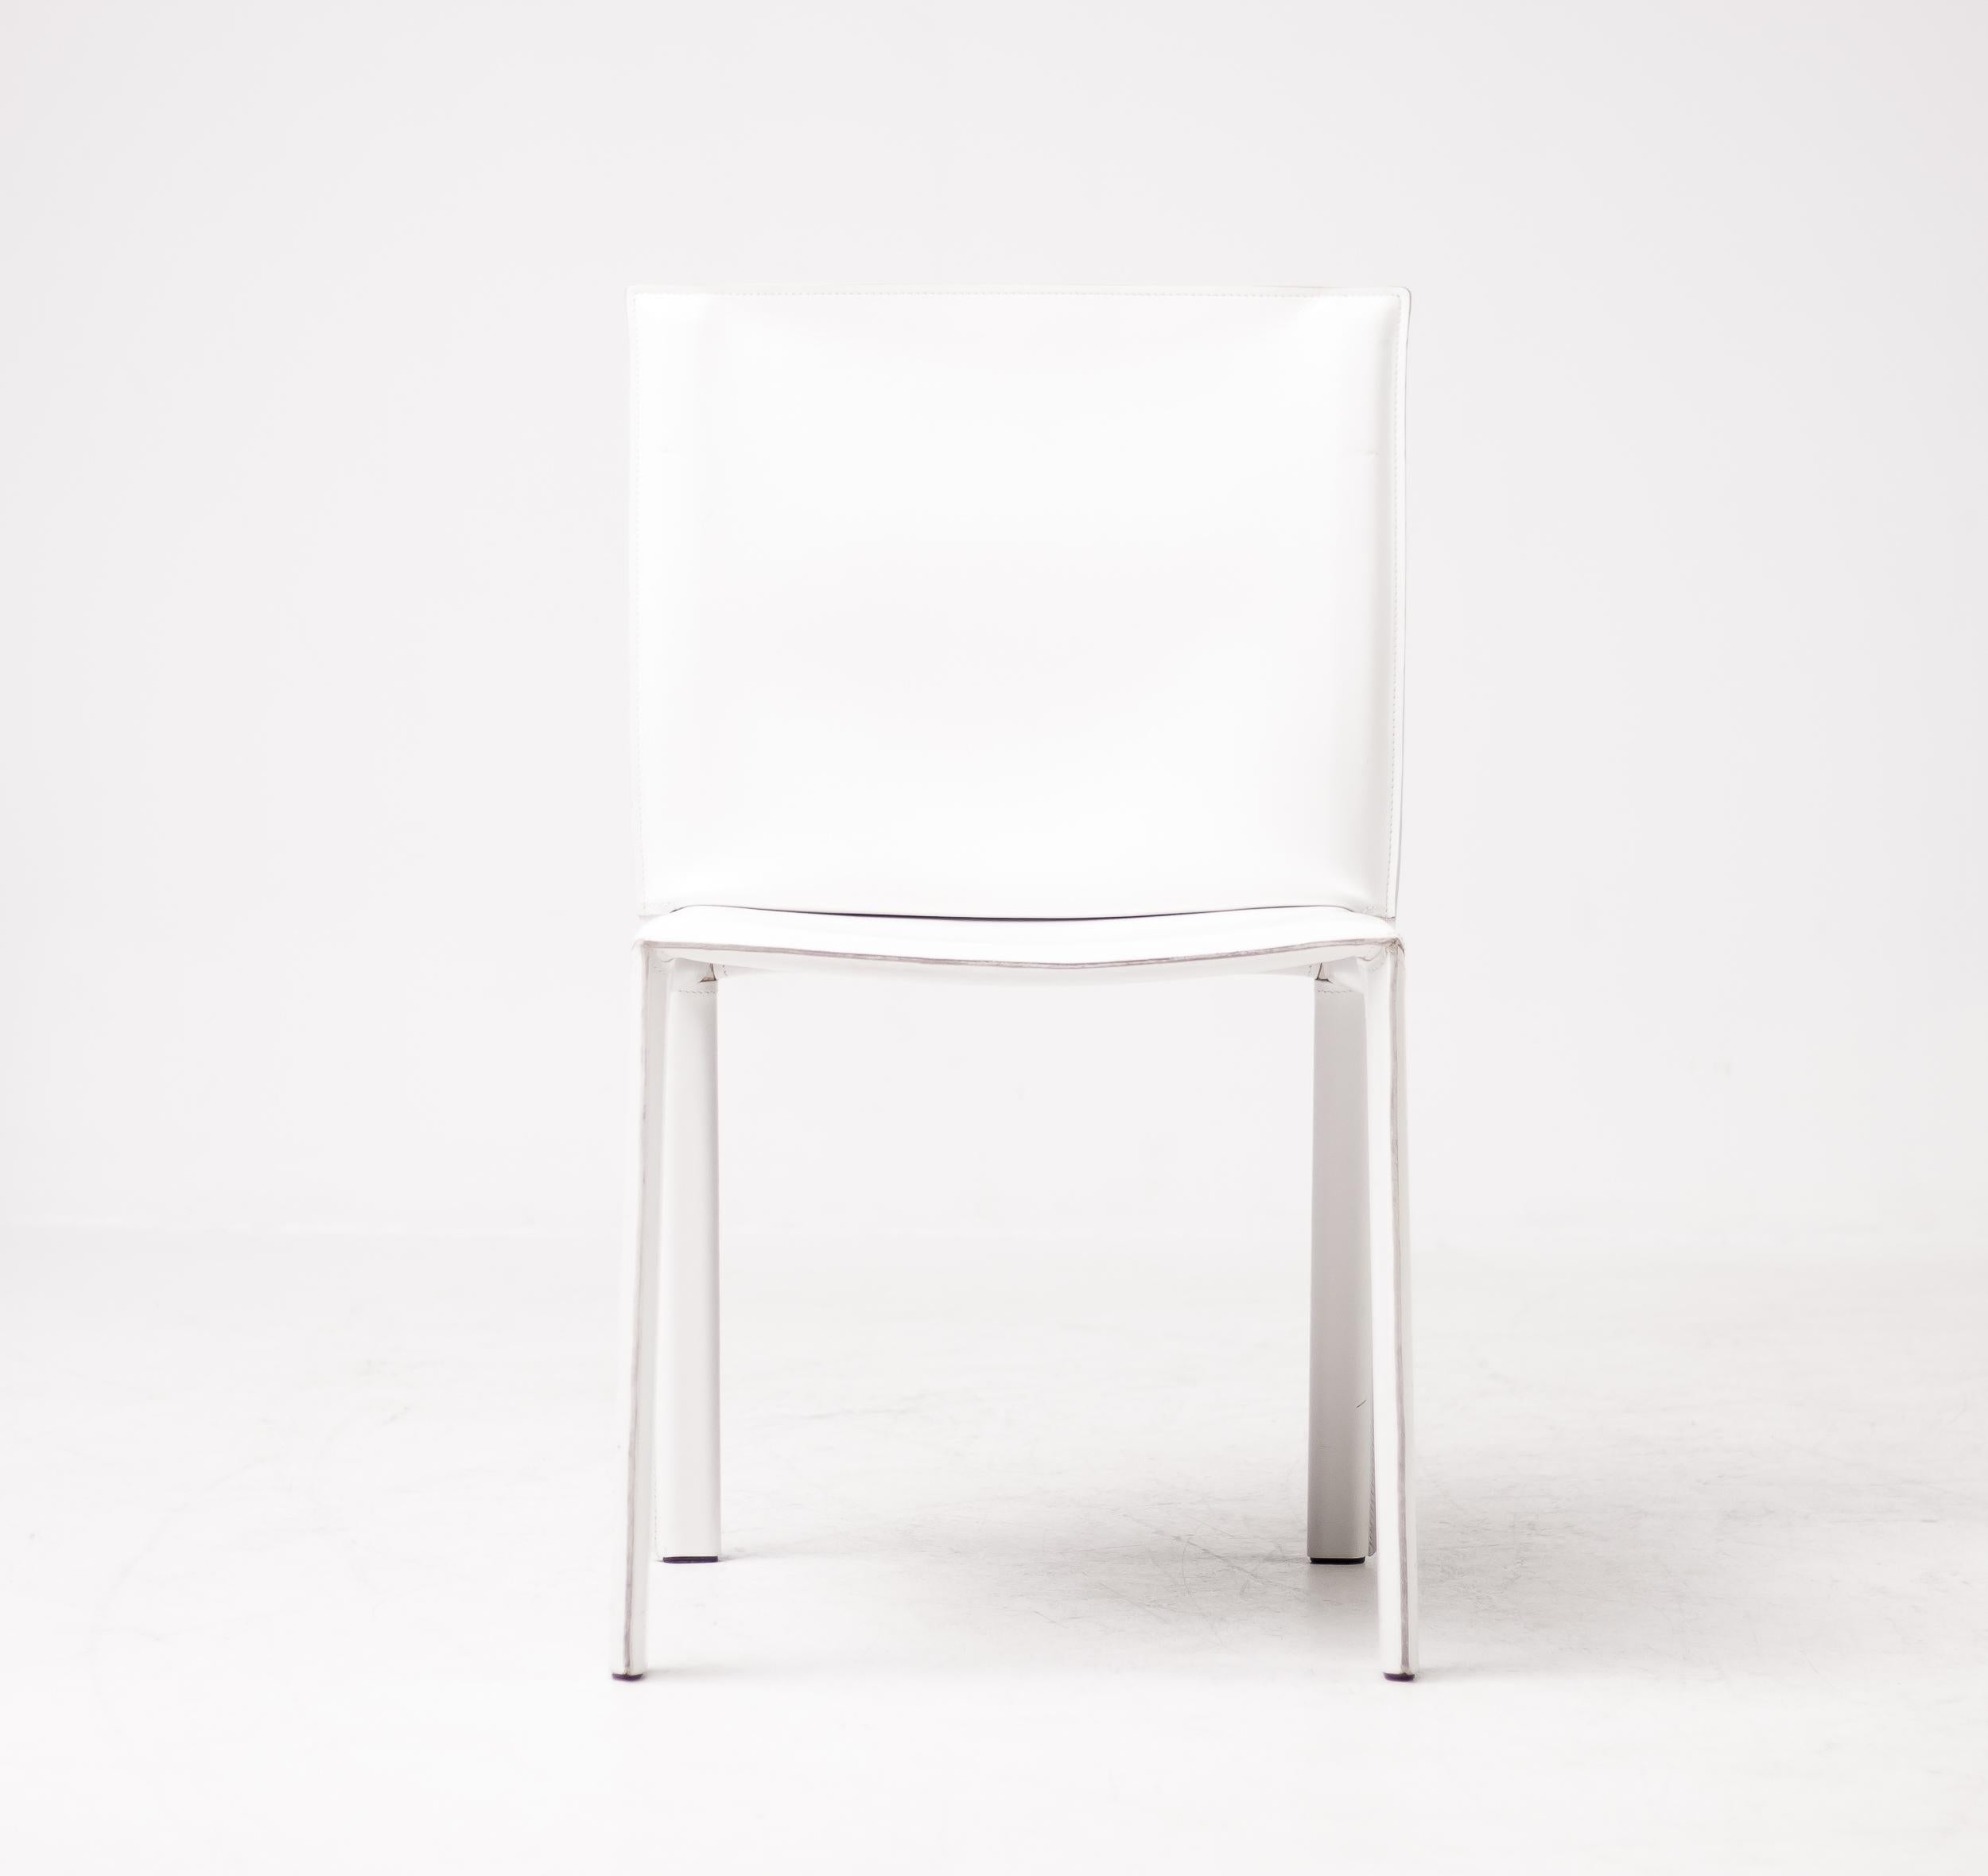 Gorgeous set of 8 Enrico Pellizzoni Pasqualina chairs designed by Grassi & Bianchi. These chairs are covered in wonderful white all grain leather. The chairs were purchased in 2010 and are meticulously maintained. 
They are in excellent condition